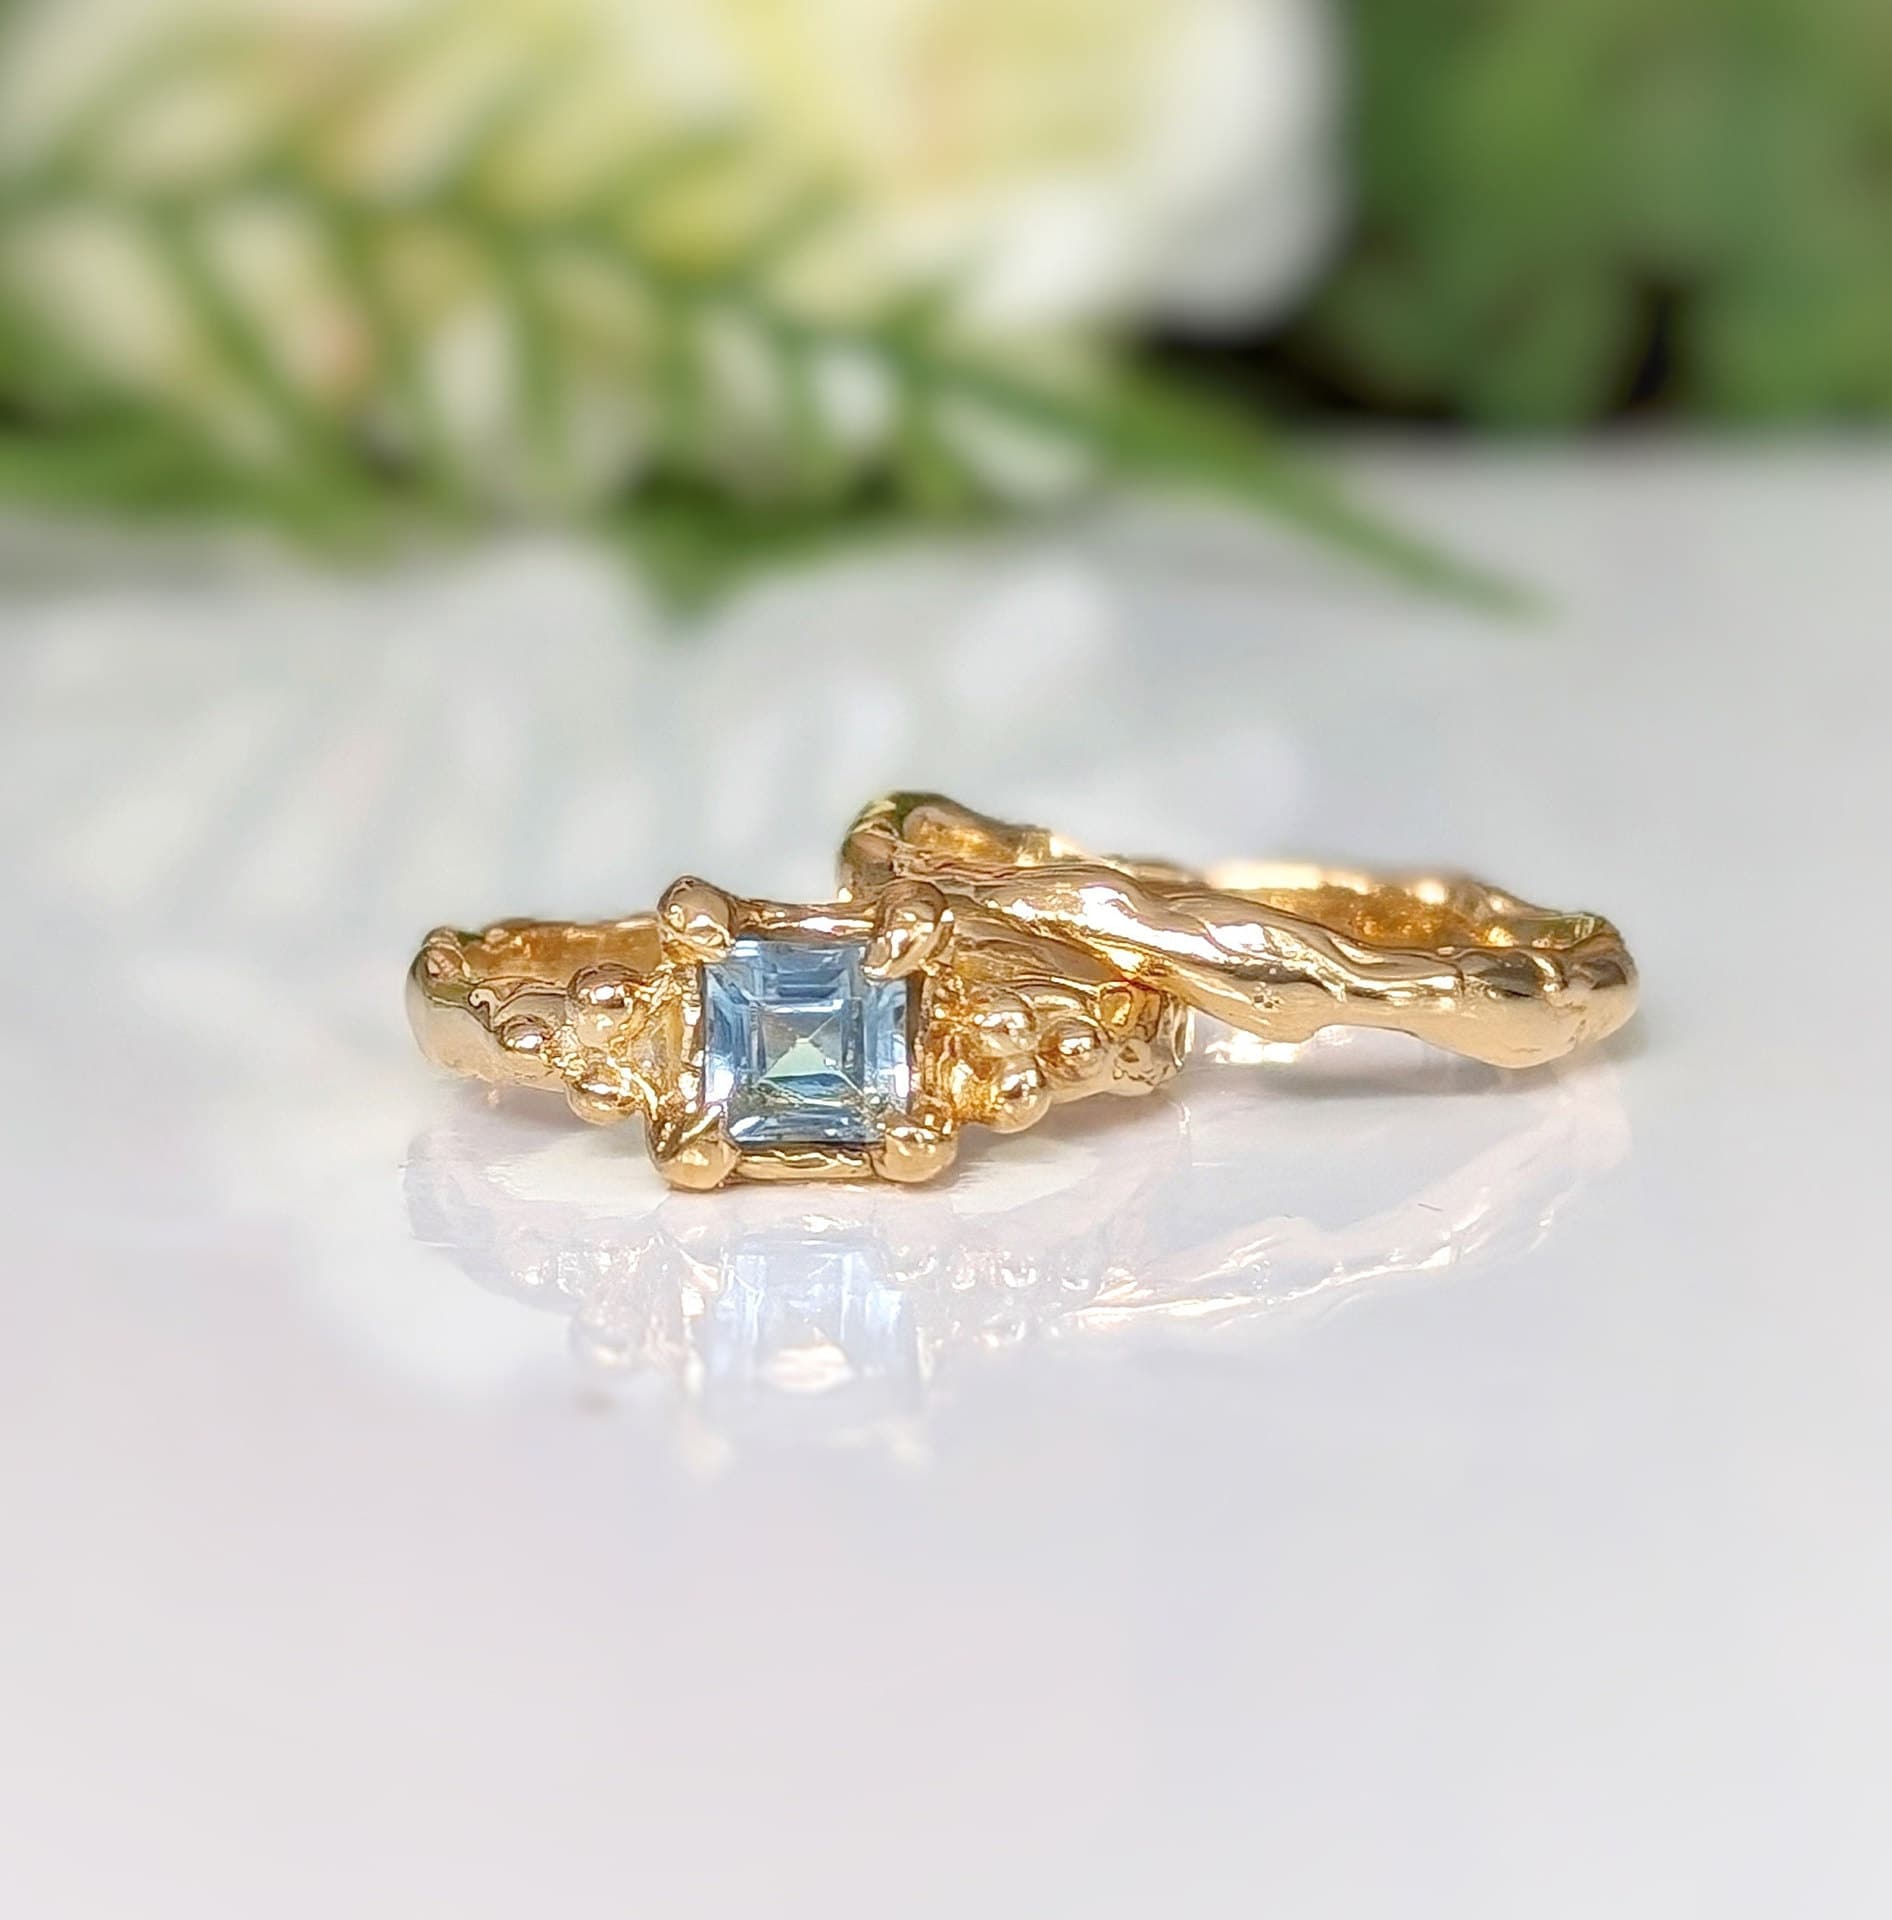 Square blue Topaz ring and simple textured band made of Solid 14k Gold